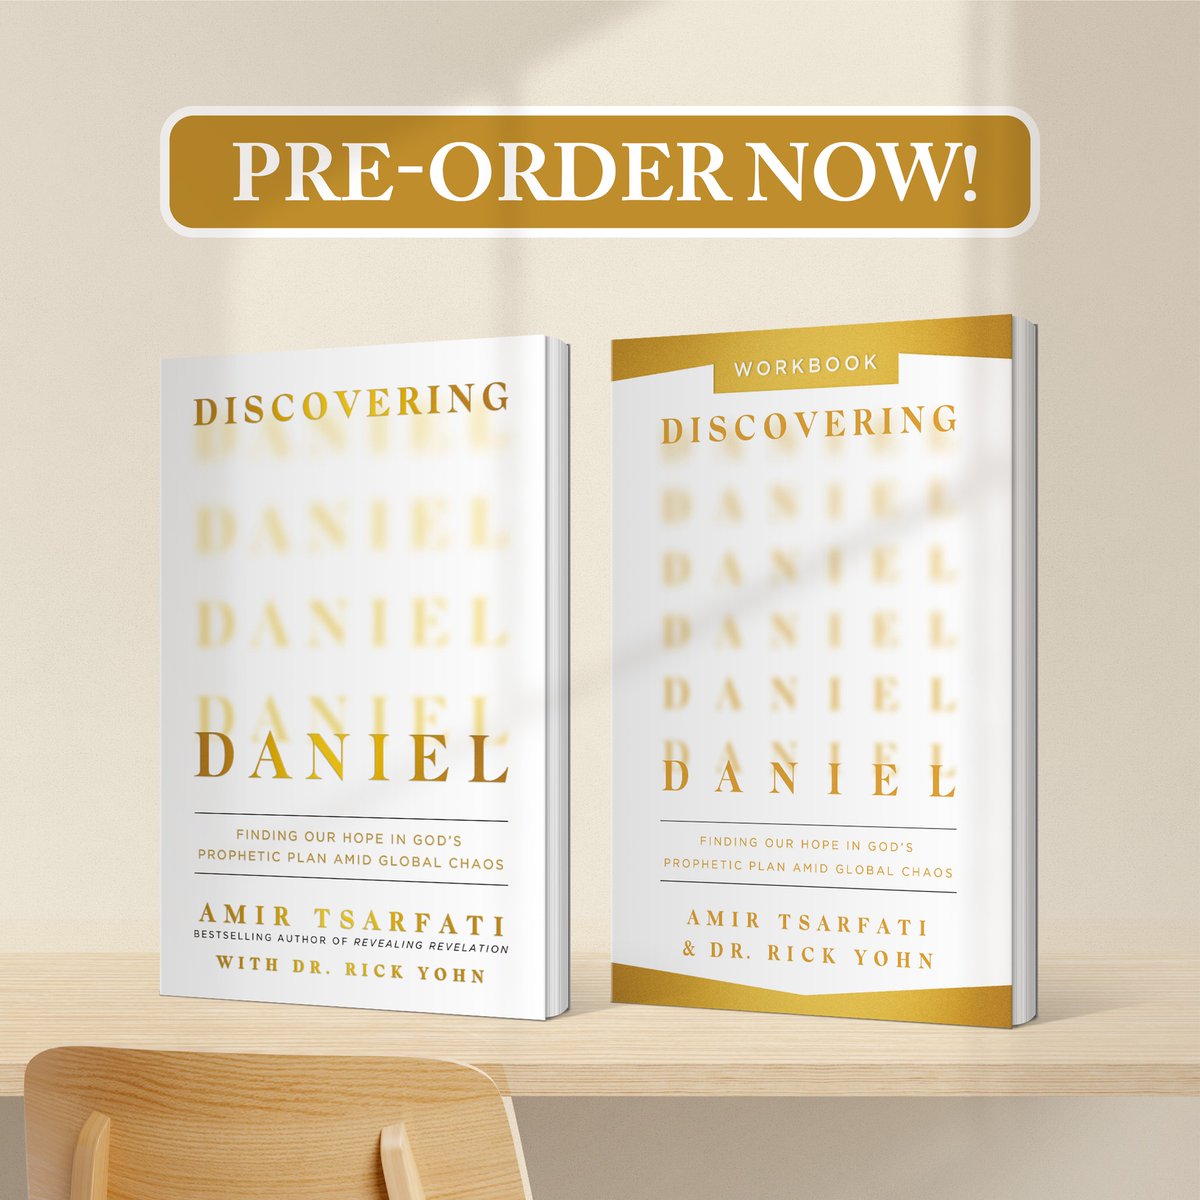 Secure your copy of 'Discovering Daniel' today! Your pre-order ensures widespread availability in major retailers like Target, Walmart, and Hobby Lobby. Get ready to uncover the significance of Daniel's dreams! Pre-order now: amzn.to/3UTwWgT